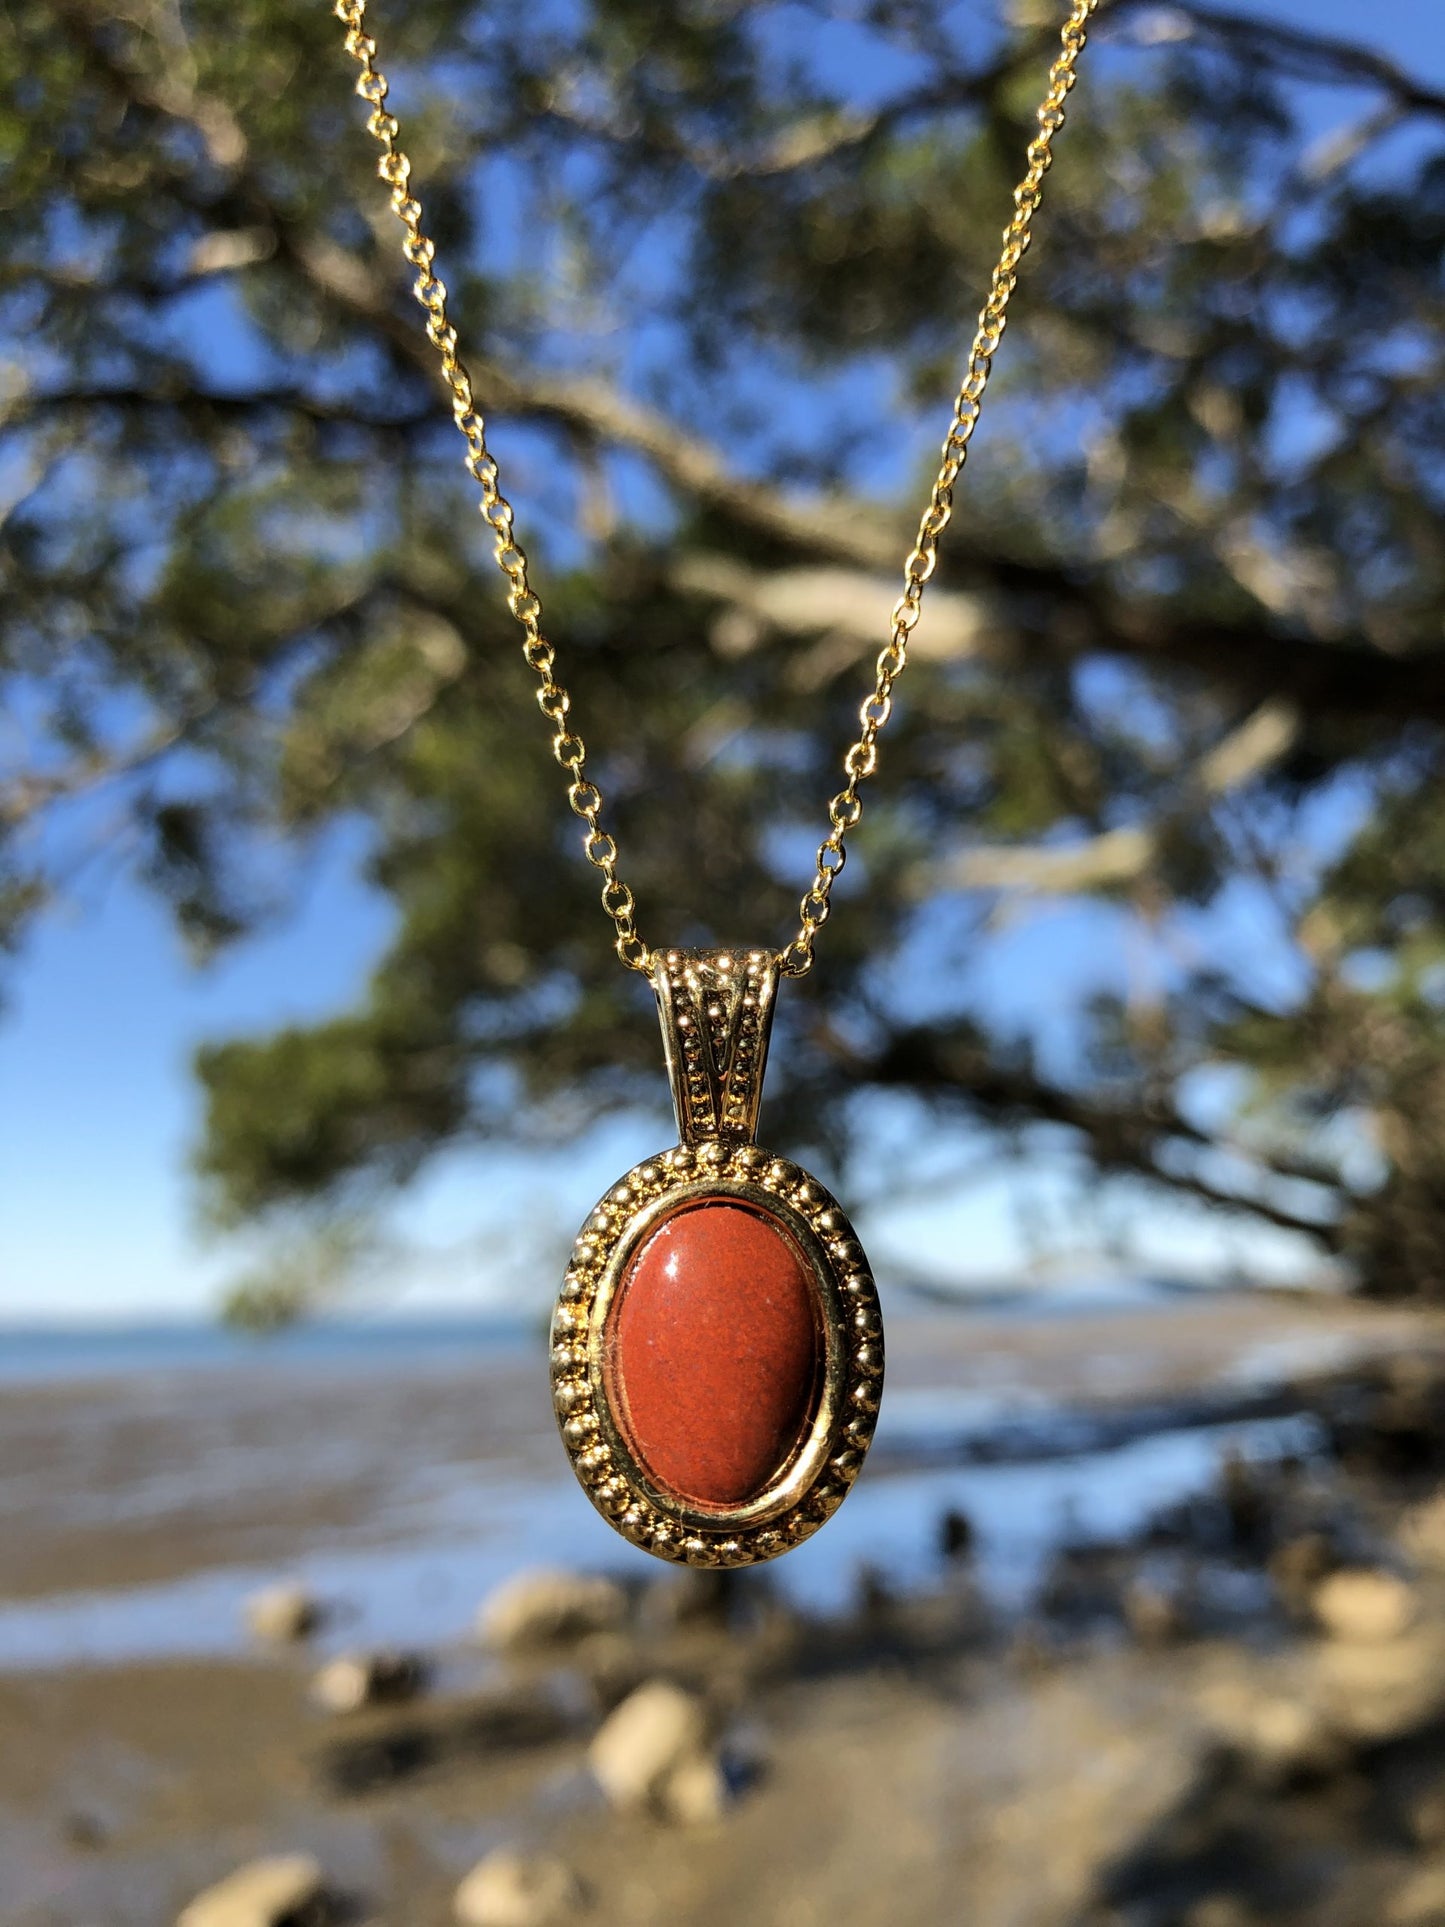 Necklace with New Zealand red Jasper, pure bright red, hand polished to a 14x10mm cabochon and set in a gold plated setting with 19 inch chain.